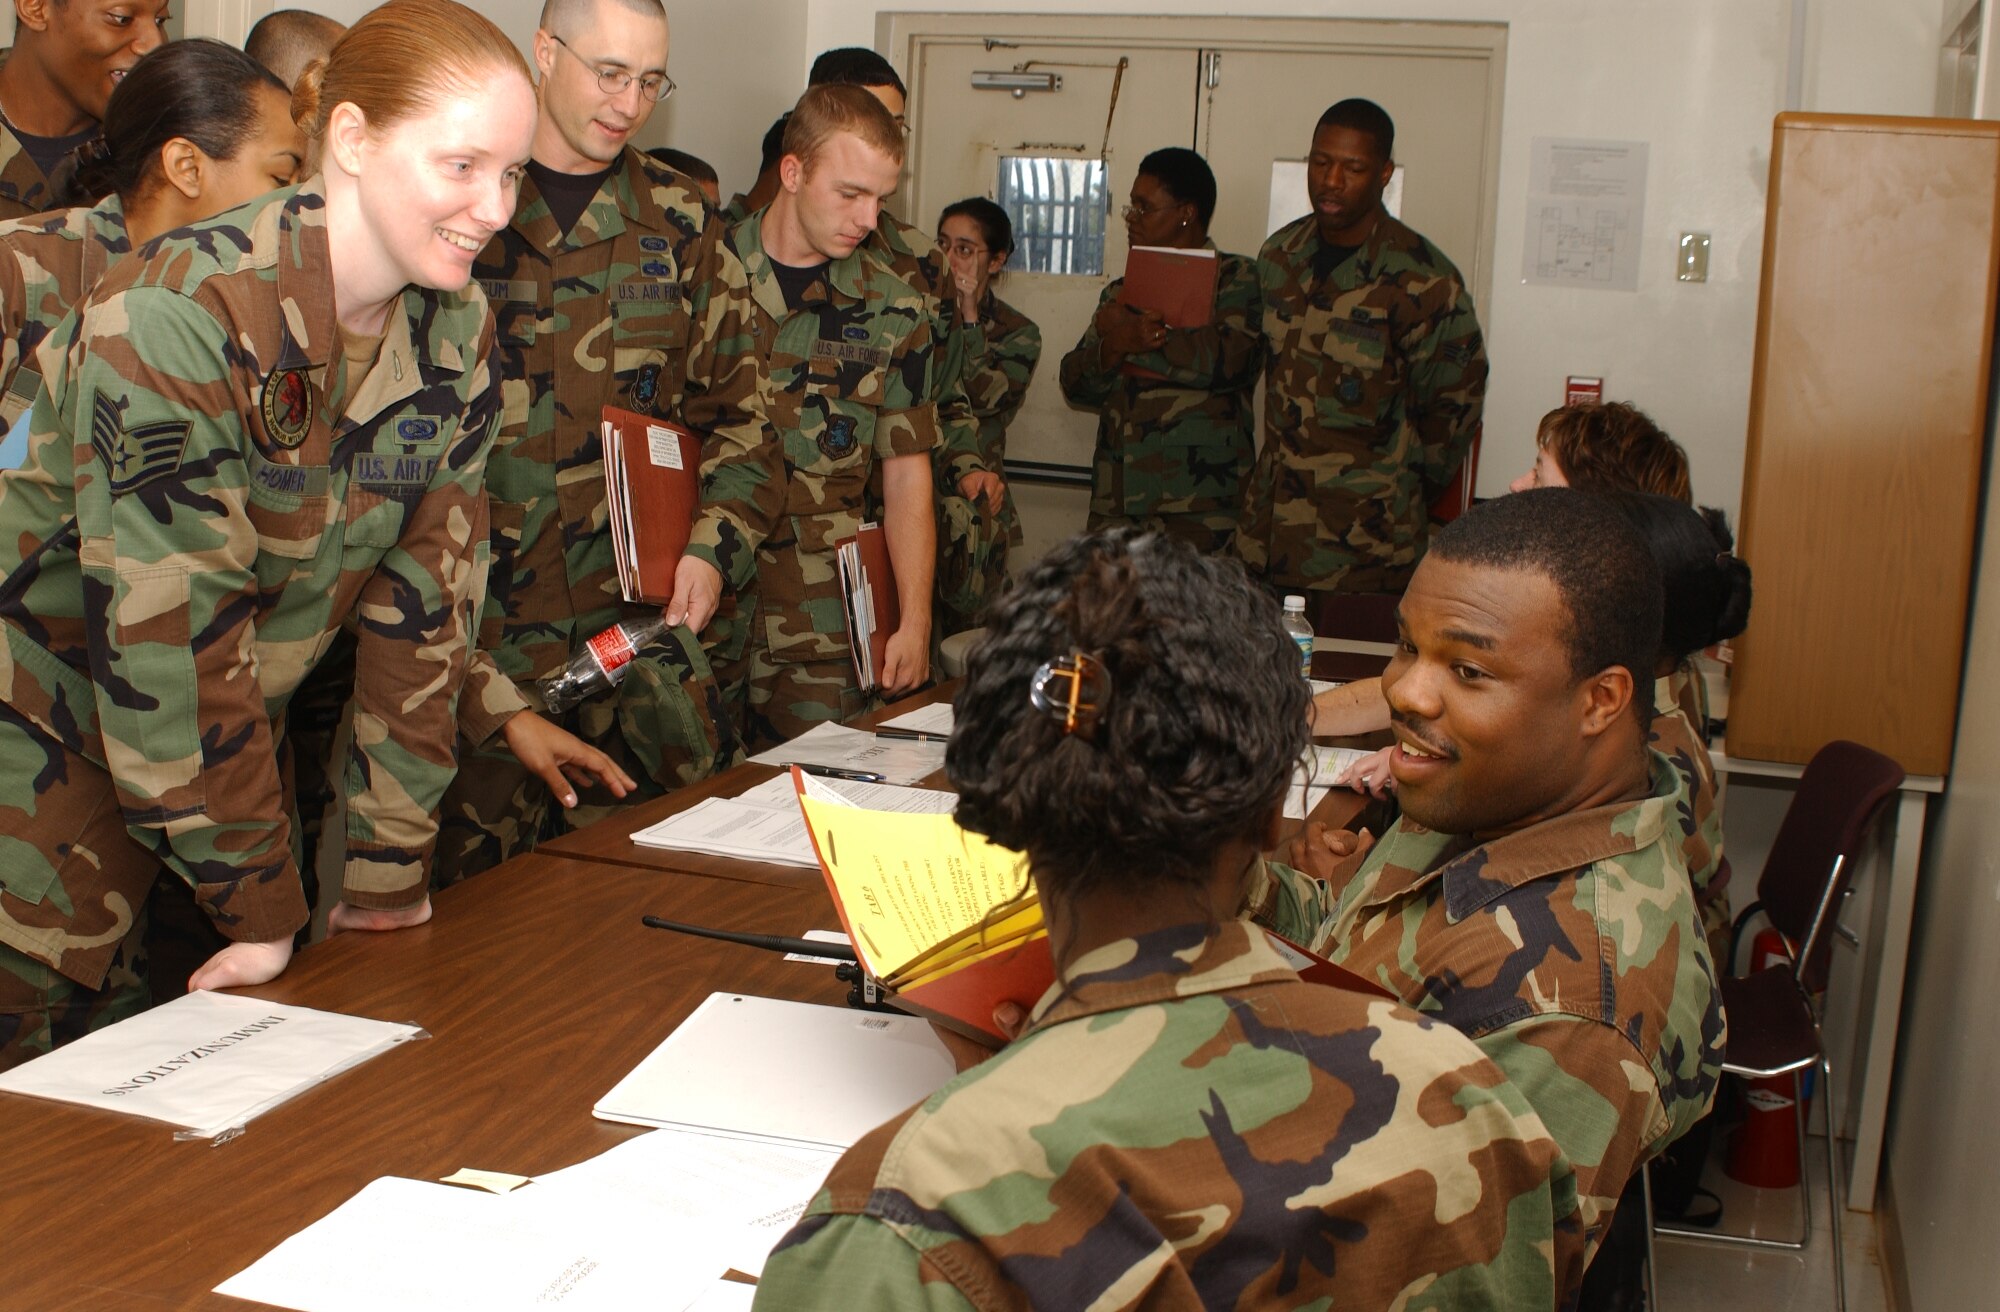 Staff Sgt. Sandra Homer, left, 81st Contracting Squadron, has her immunization records reviewed by Staff Sgt. Javon Craig, 81st Medical Operations Squadron, Nov. 7 during the 81st Training Wing's deployment exercise. (Photo by Kemberly Groue)